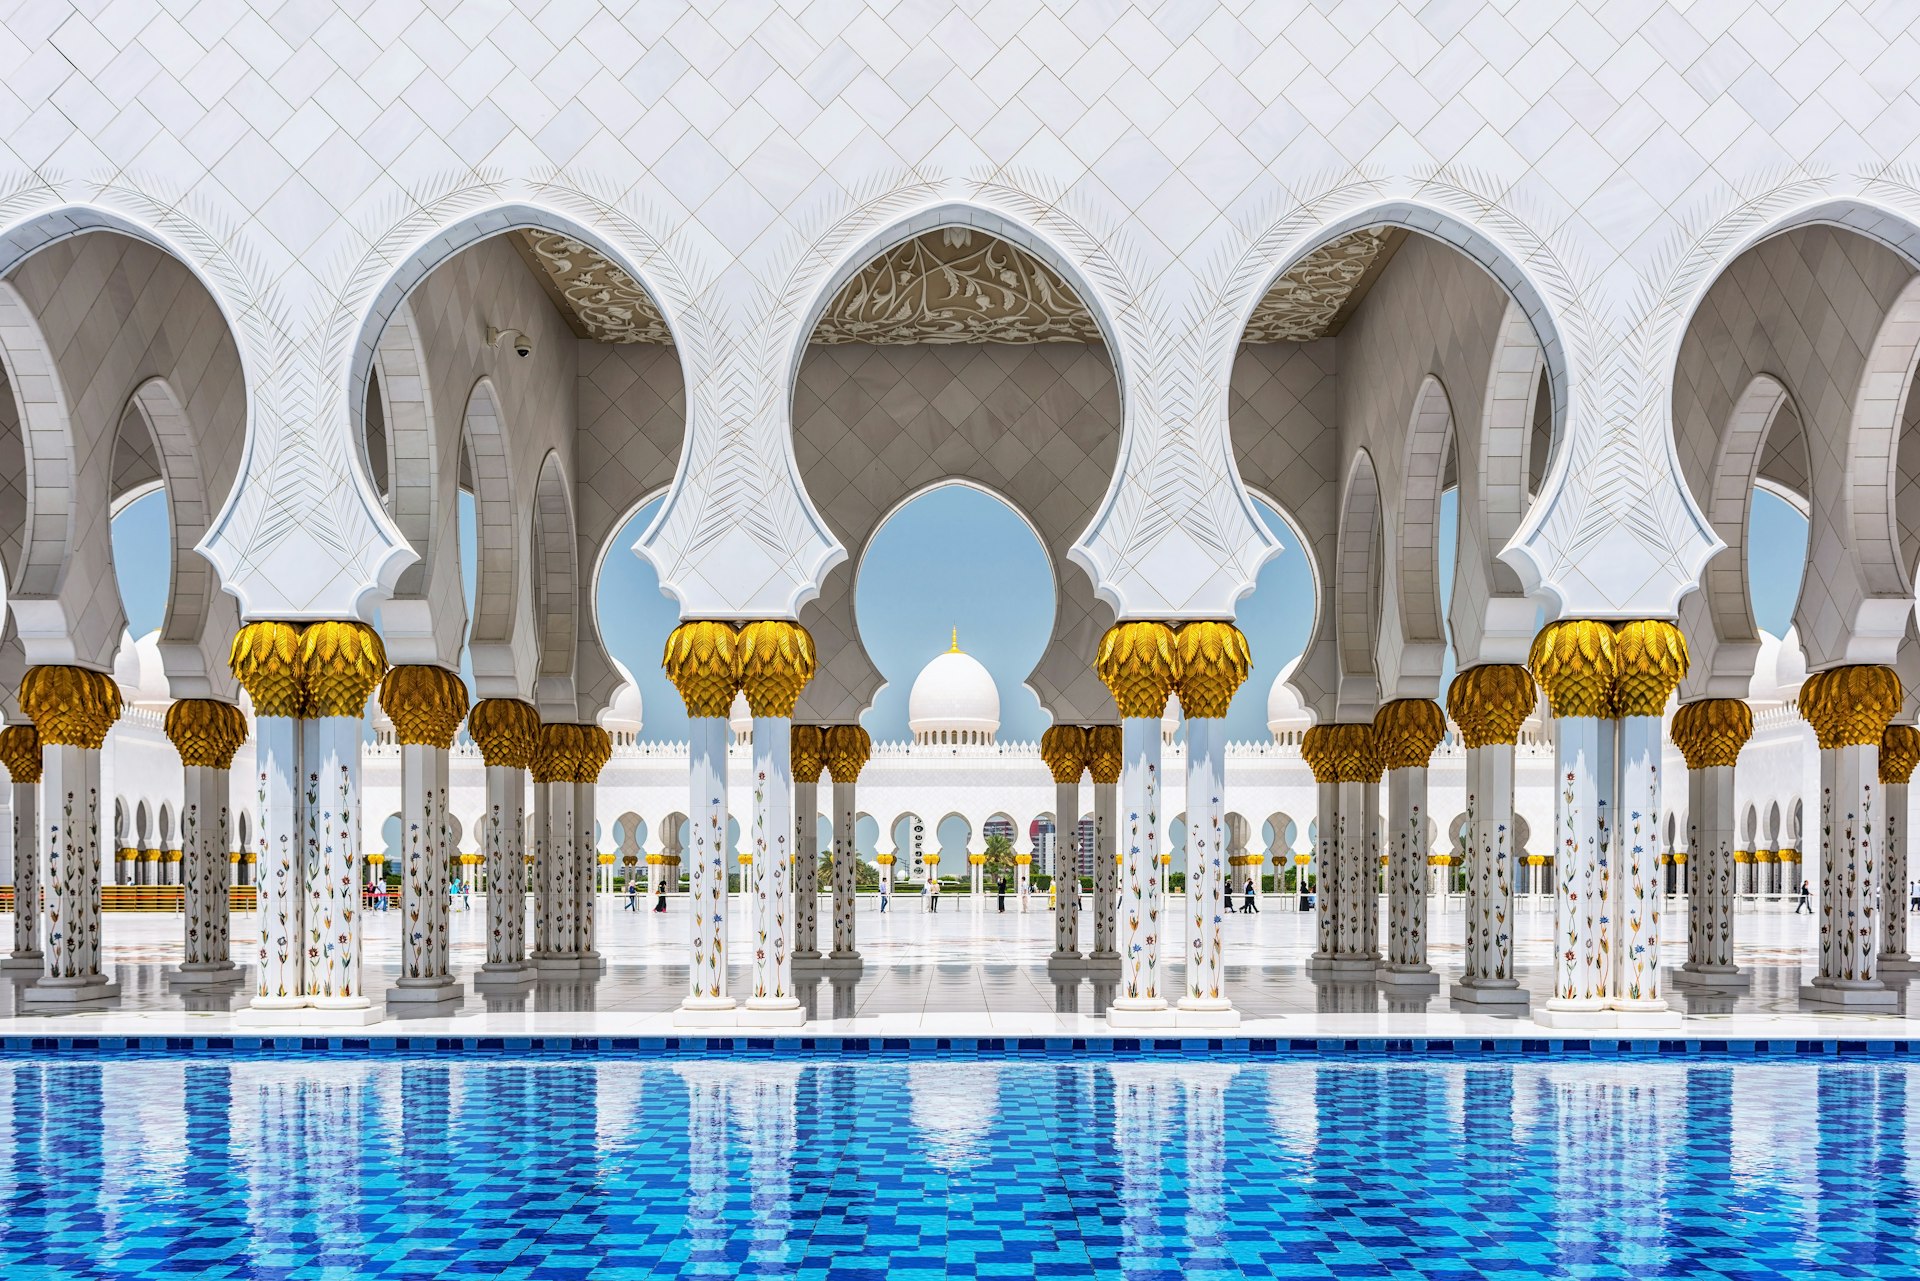 A set of arches at Sheikh Zayed Grand Mosque in Abu Dhabi, United Arab Emirates